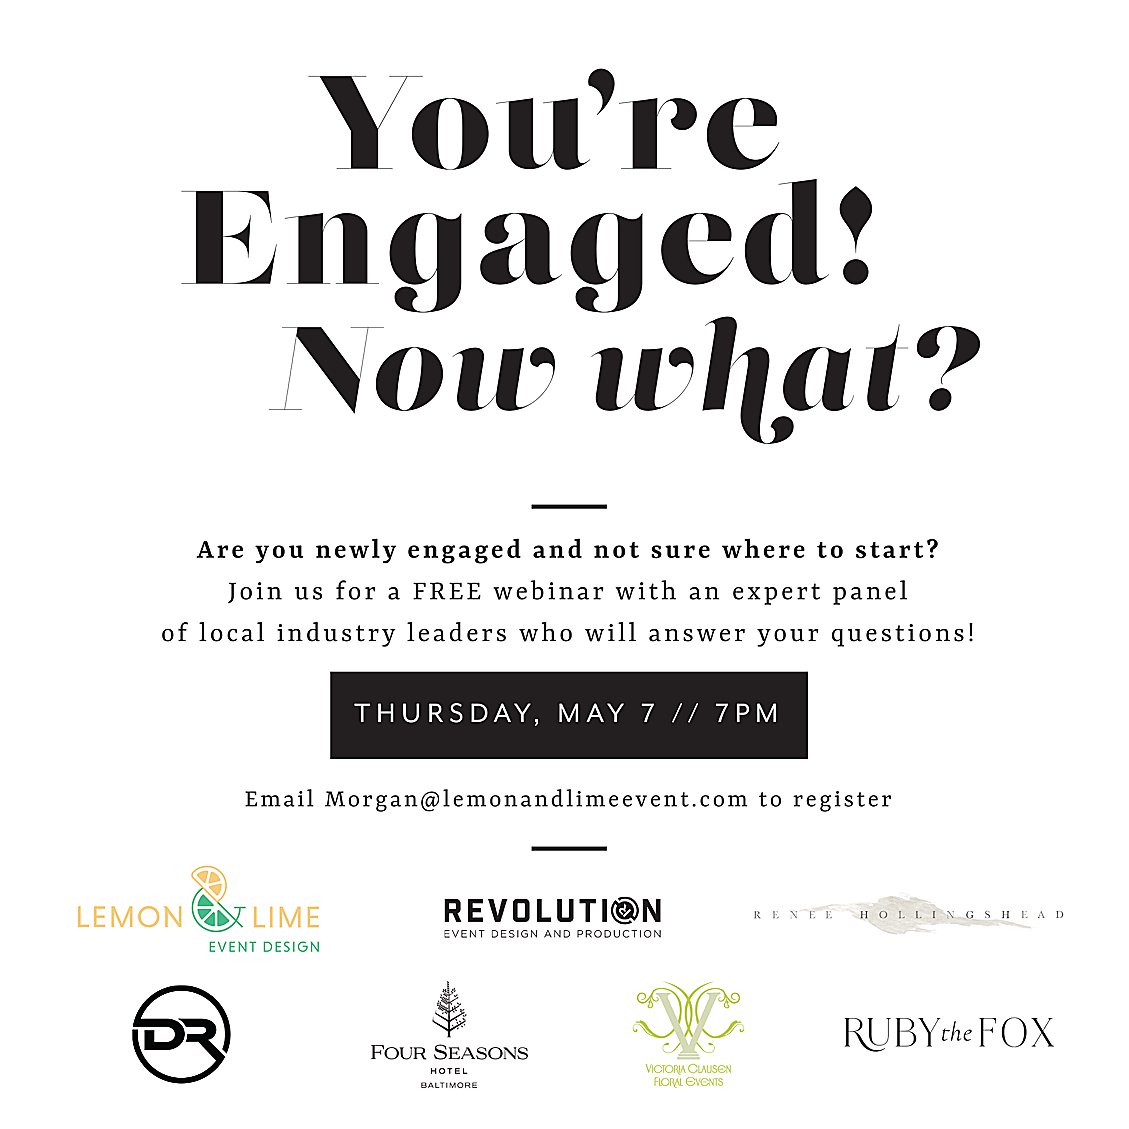 You're Engaged, Now What? FREE Online Webinar with Baltimore's Top Wedding Professionals including Lemon & Lime Event Design, Renee Hollingshead Photography, District Remix, Victoria Clausen Floral Events, Four Seasons Baltimore, Ruby the Fox, and more!